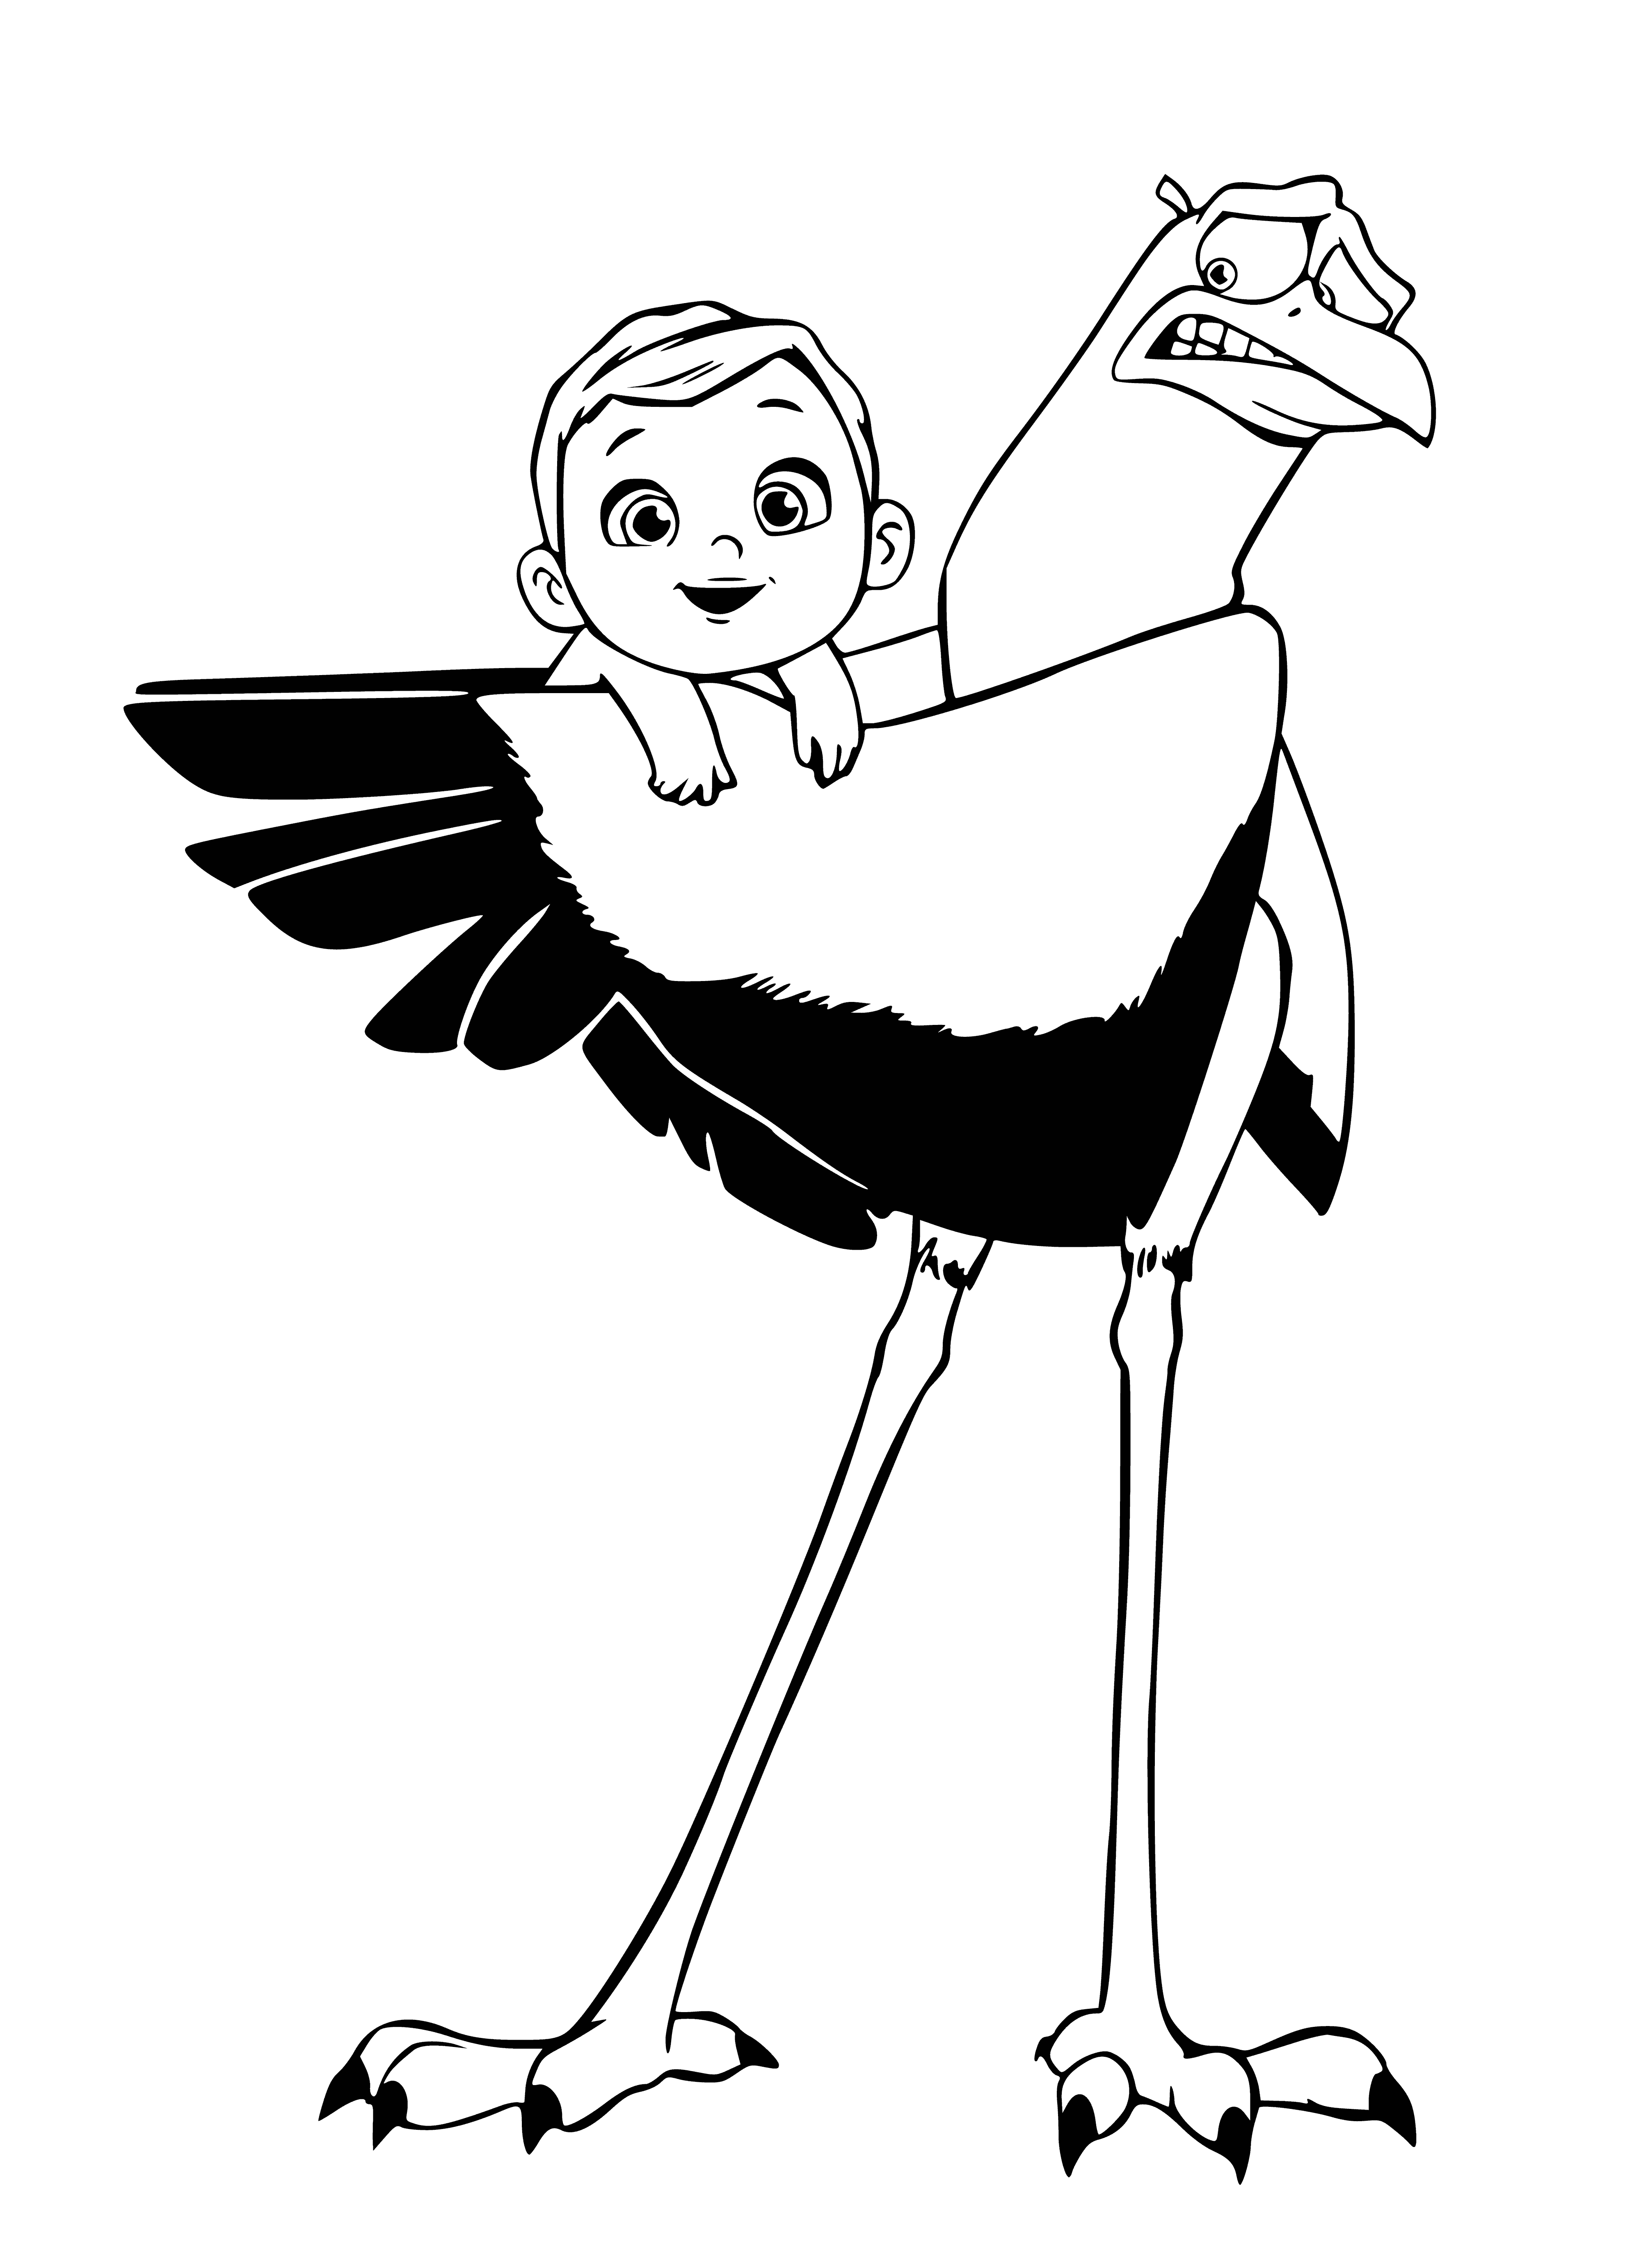 Stork holding a baby coloring page